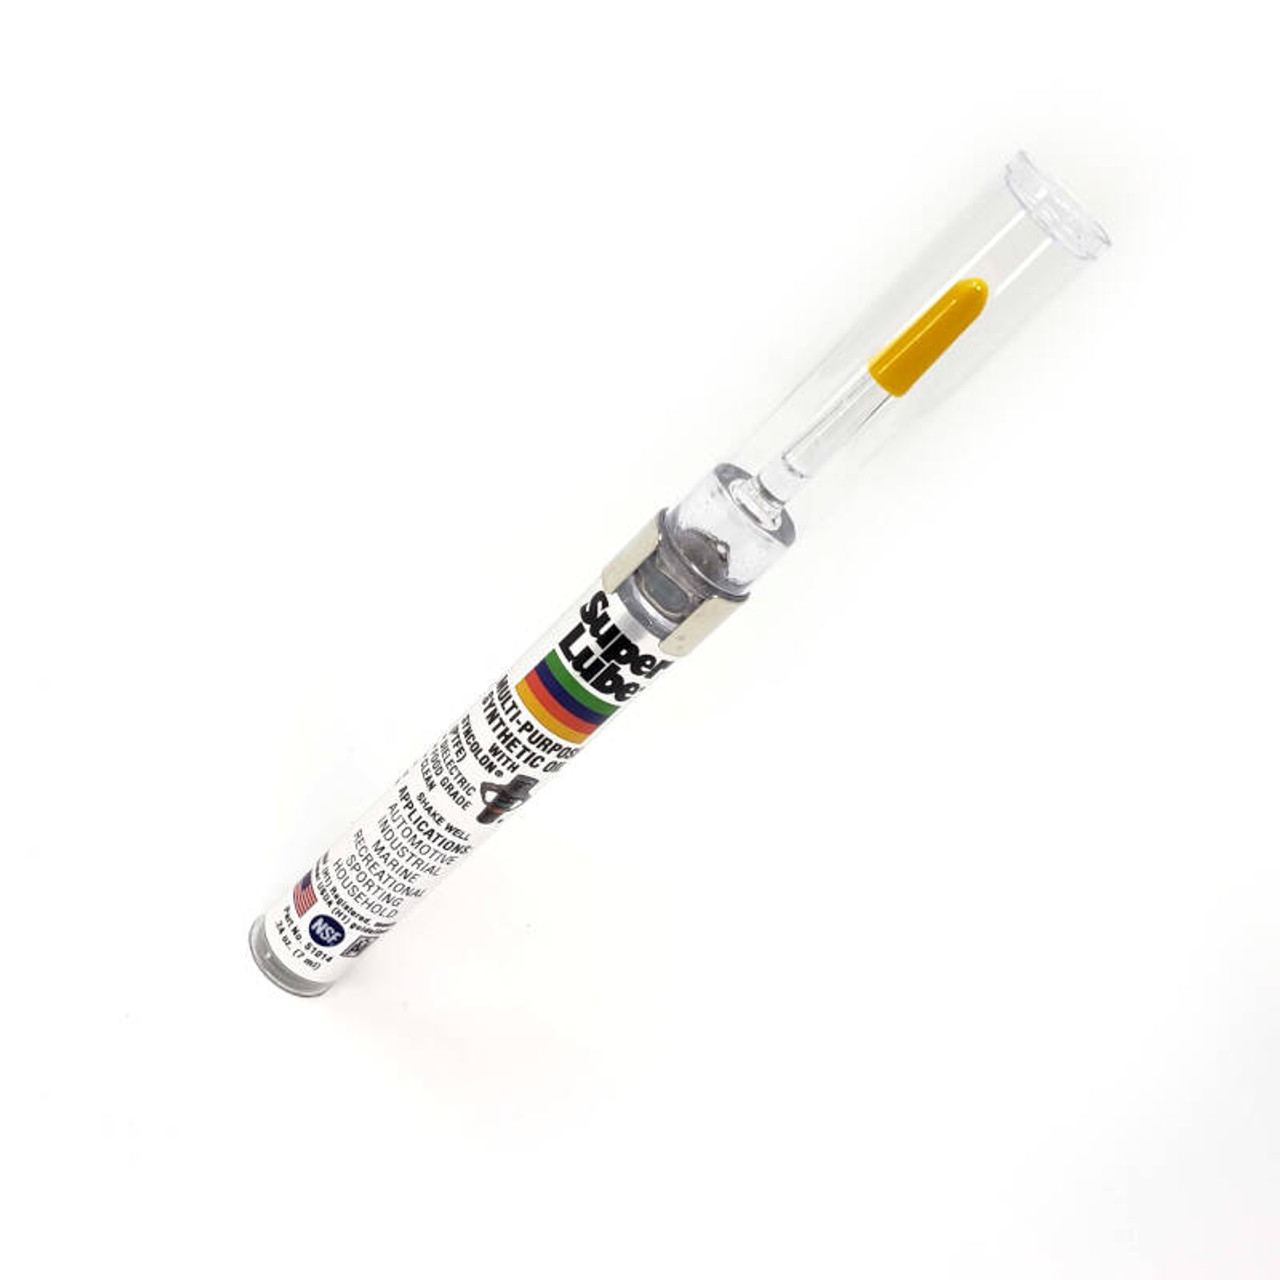 Poolin Precision Dripping Oil Pen Aluminum Alloy Applicator Precisely  Applies Other Lubricant Durable Firm Maintenance Oiler Pen - AliExpress